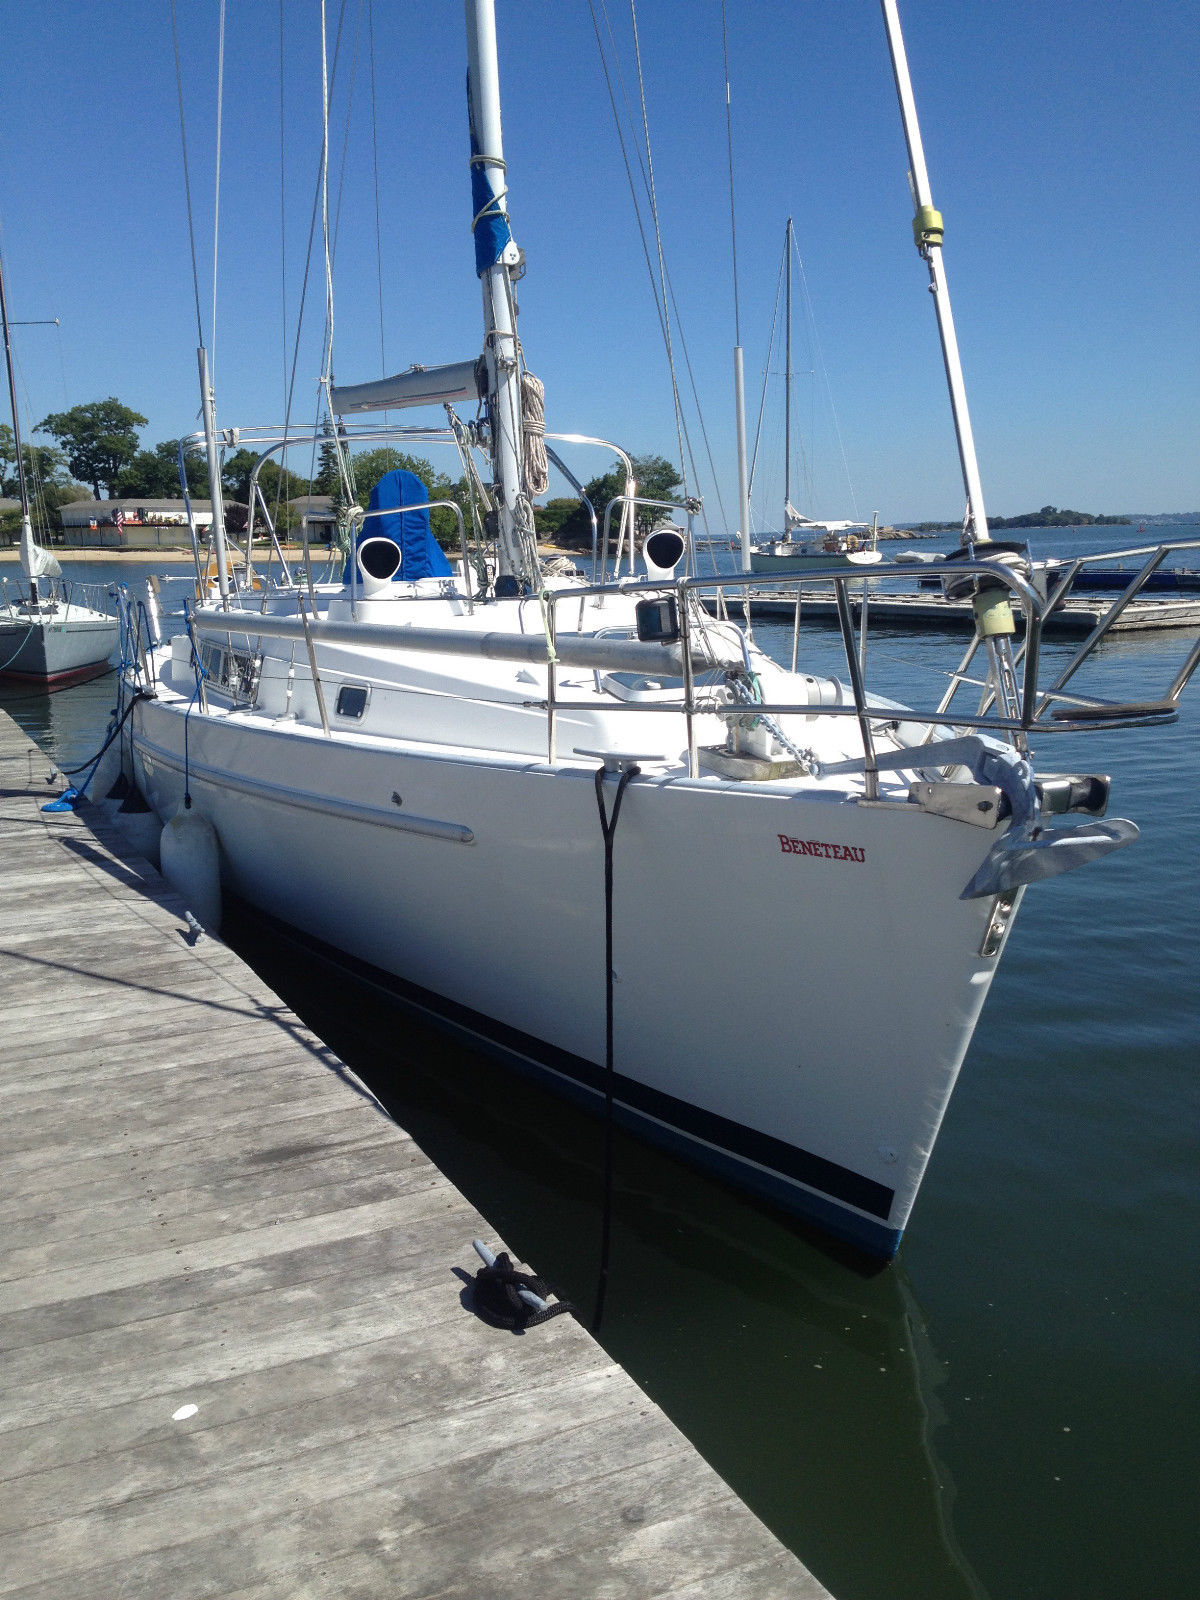 40 foot used sailboats for sale